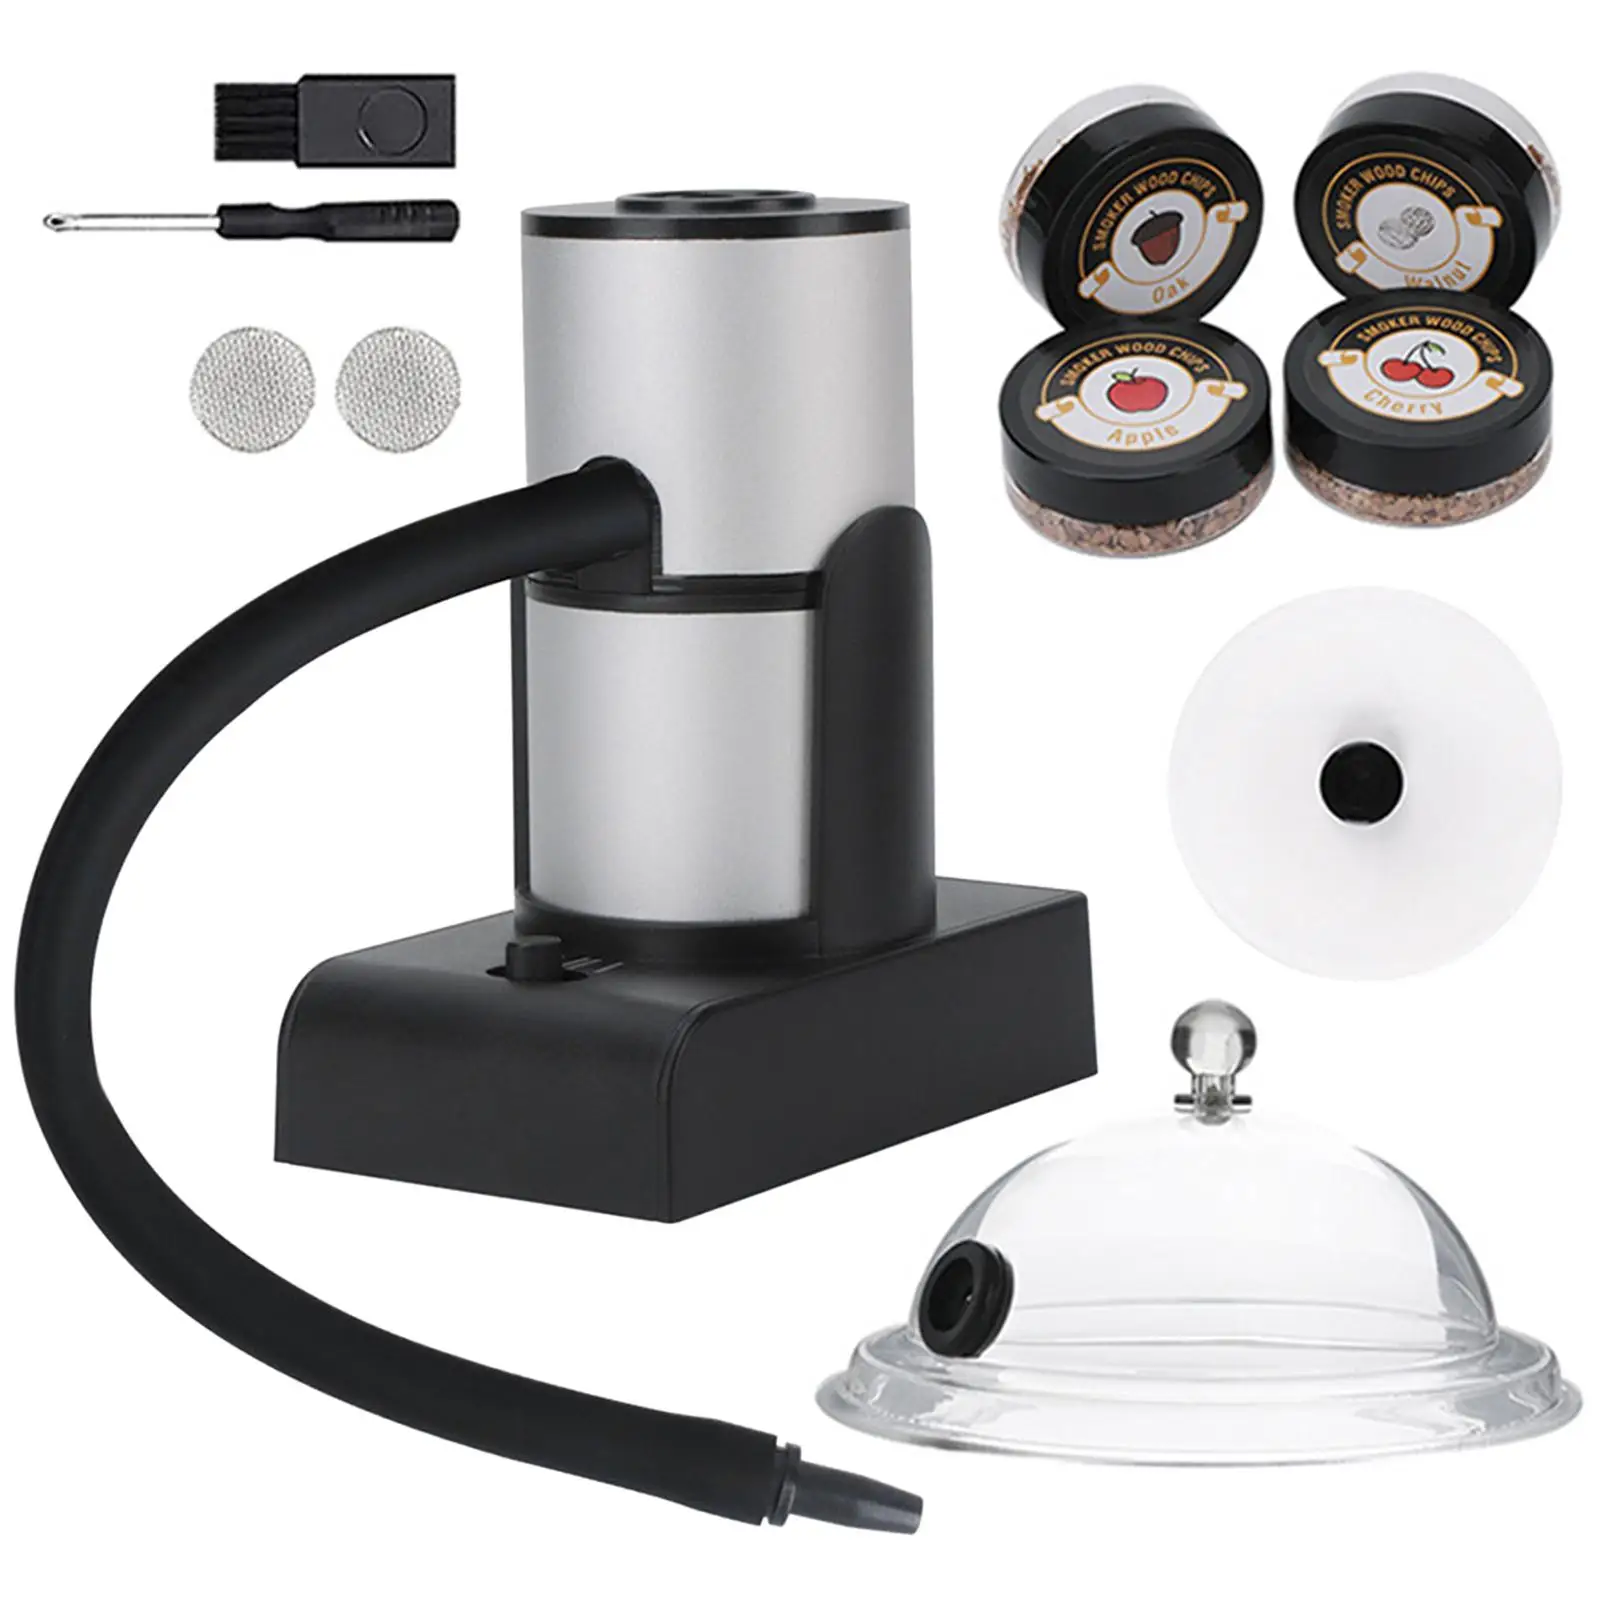 Smoke Infuser Cooking Smoker Kit with Dome Cover Handheld Food Cooking Cocktail Smoker for Grill Outdoor